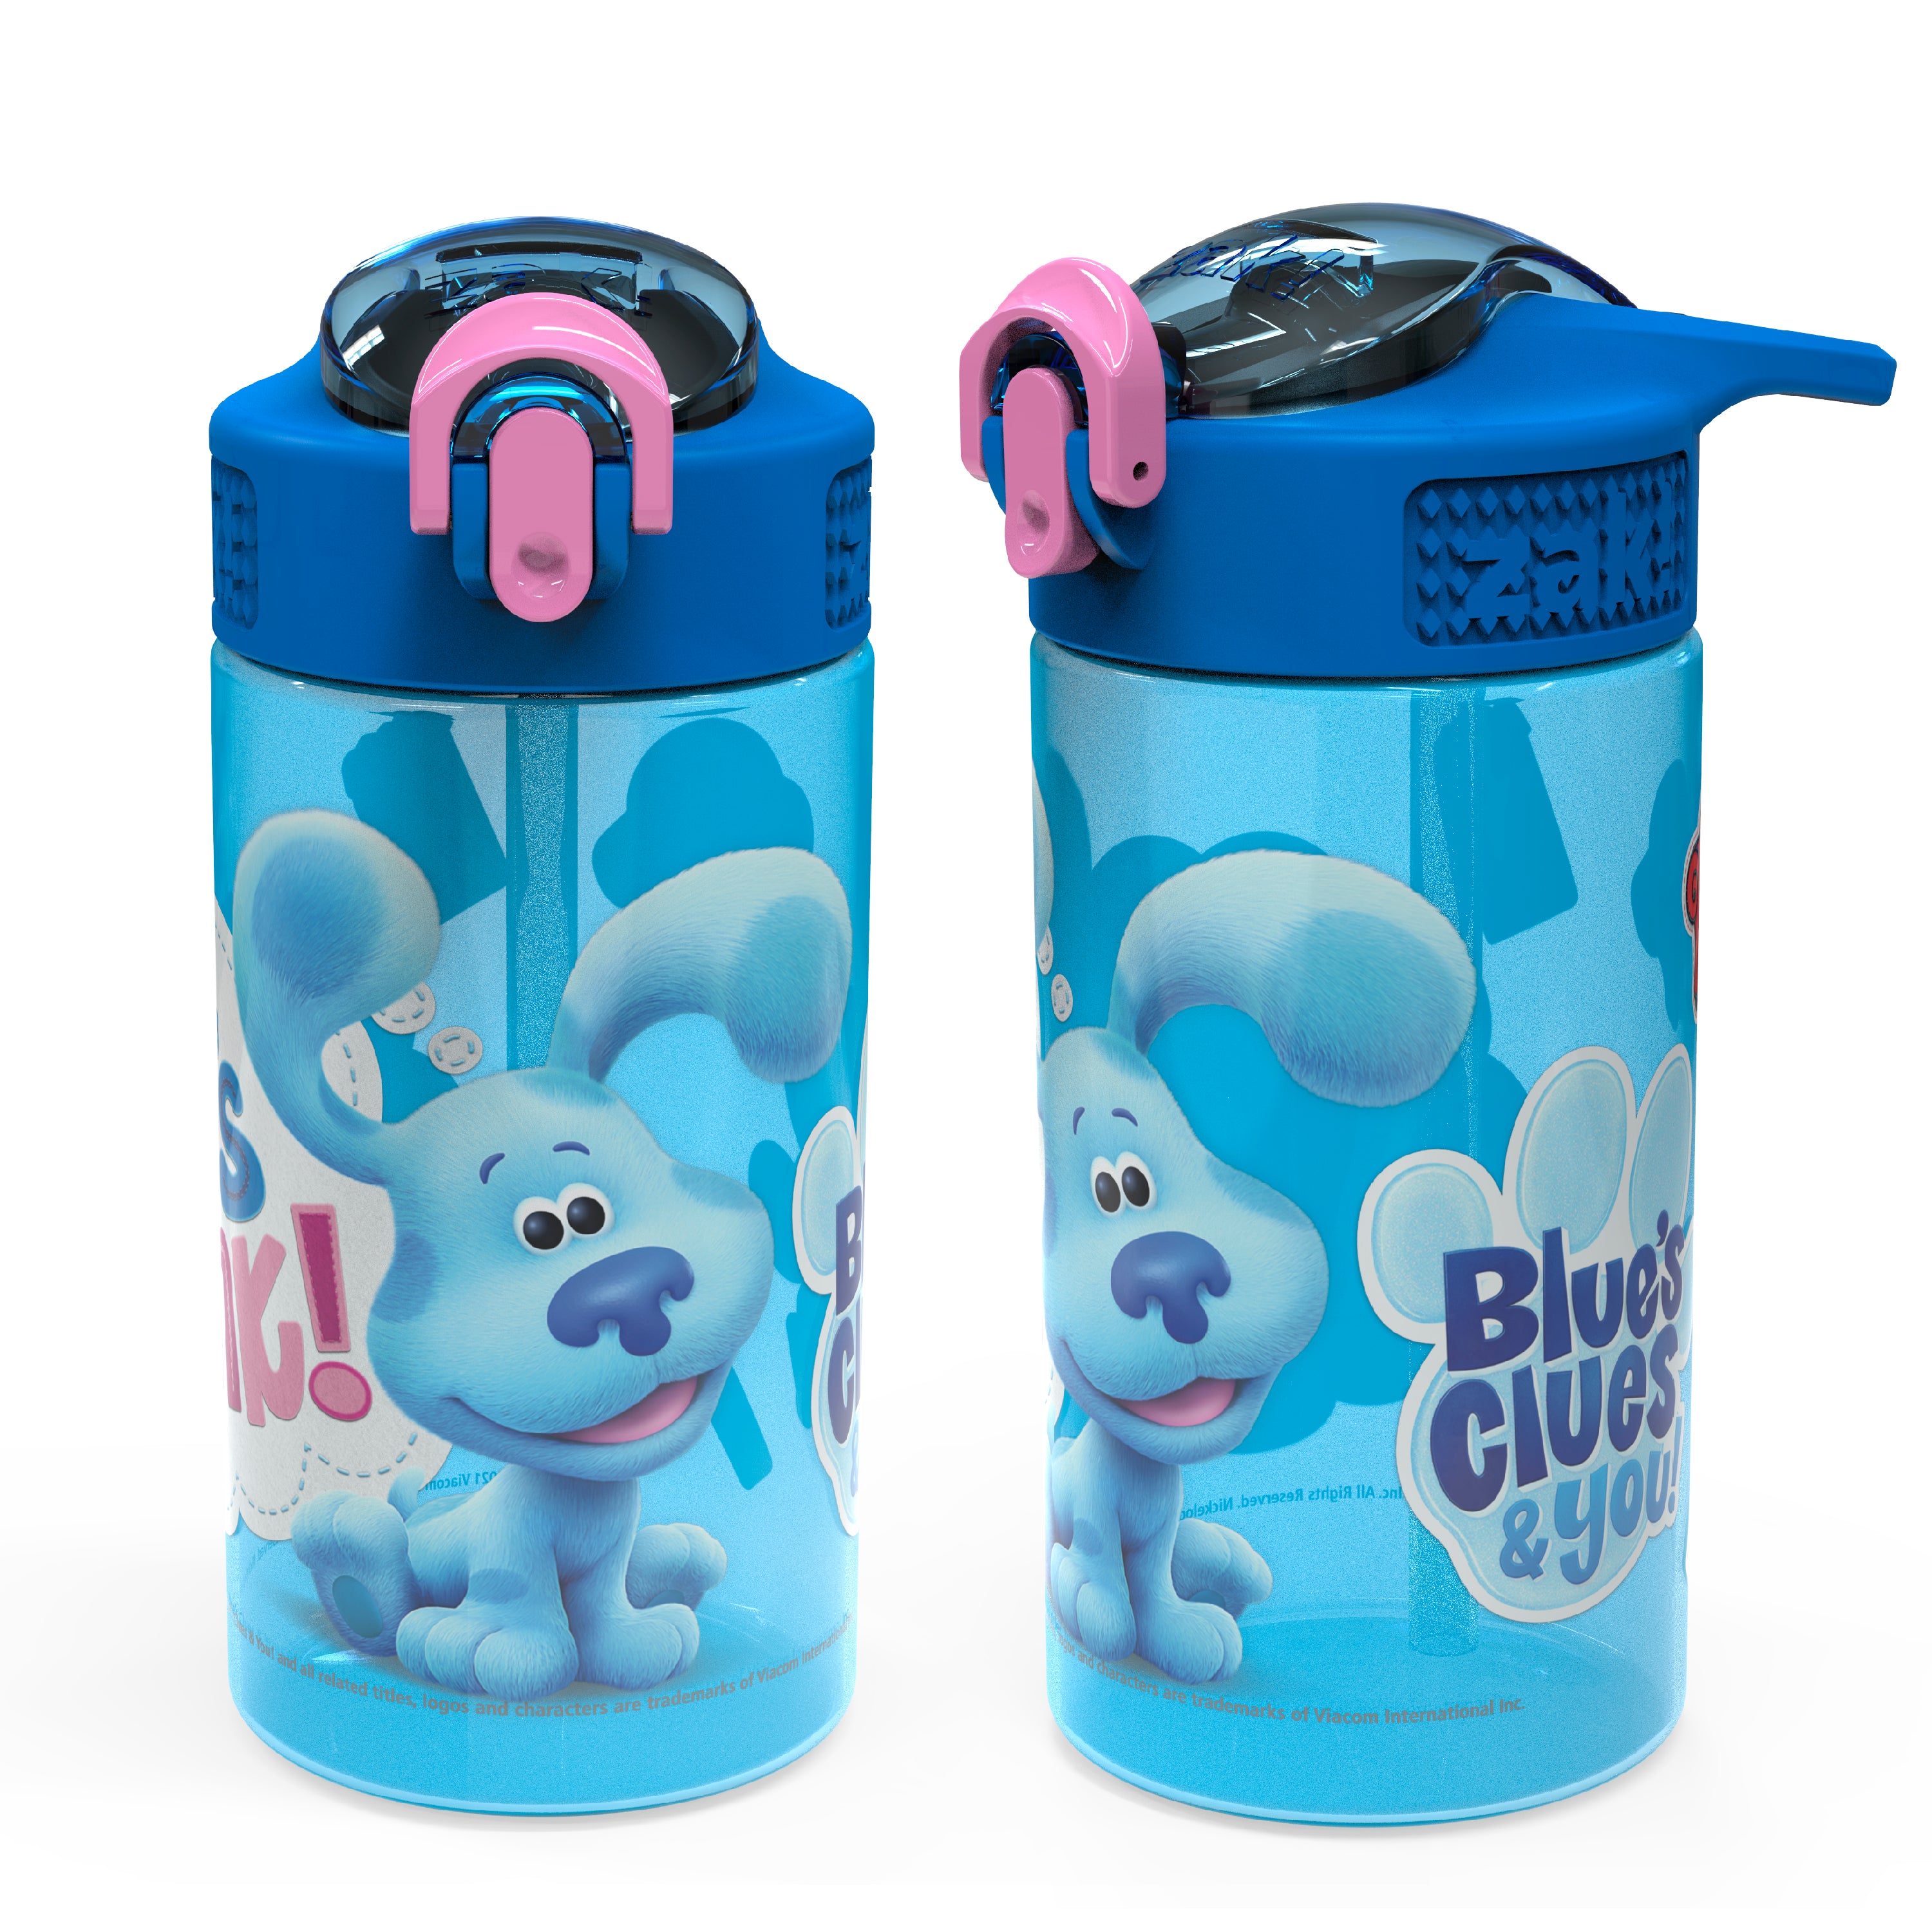 Get ready for all your kids' Heelerween activities with an adorable Bluey  bottle to keep them refreshed and hydrated! (Link in bio)